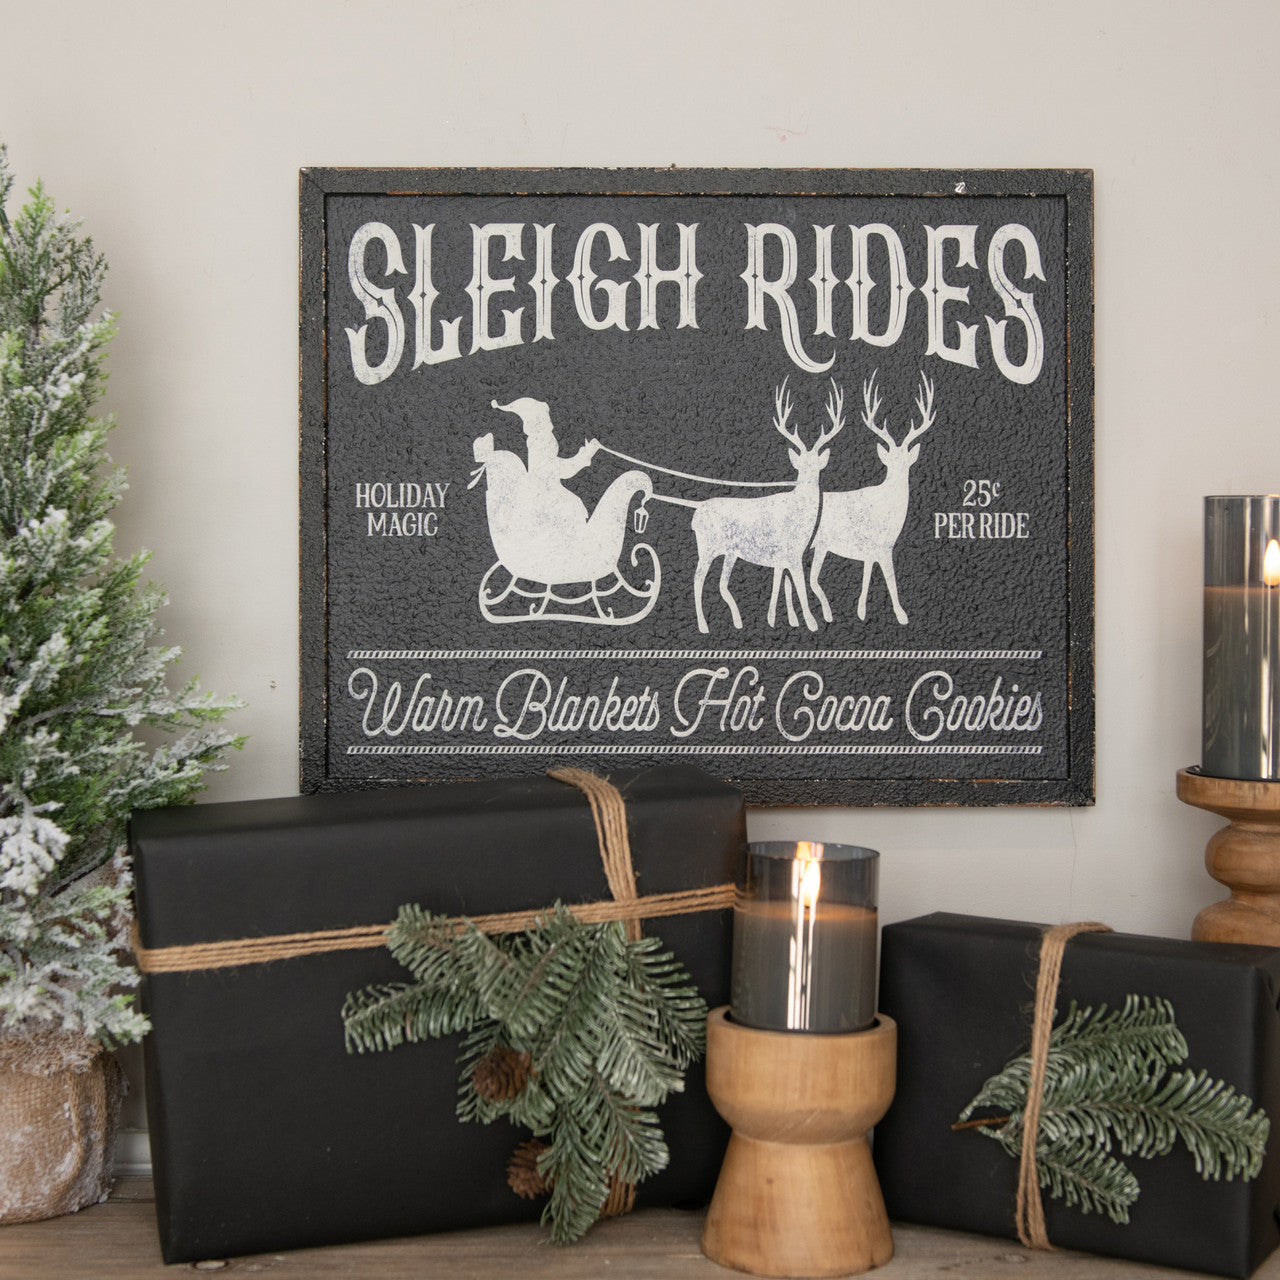 Sleigh Rides Metal Black and White Sign, Santa and Reindeer Sign, Hot Cocoa Bar Sign, Hanging Christmas Sign, Black and White Christmas Decor